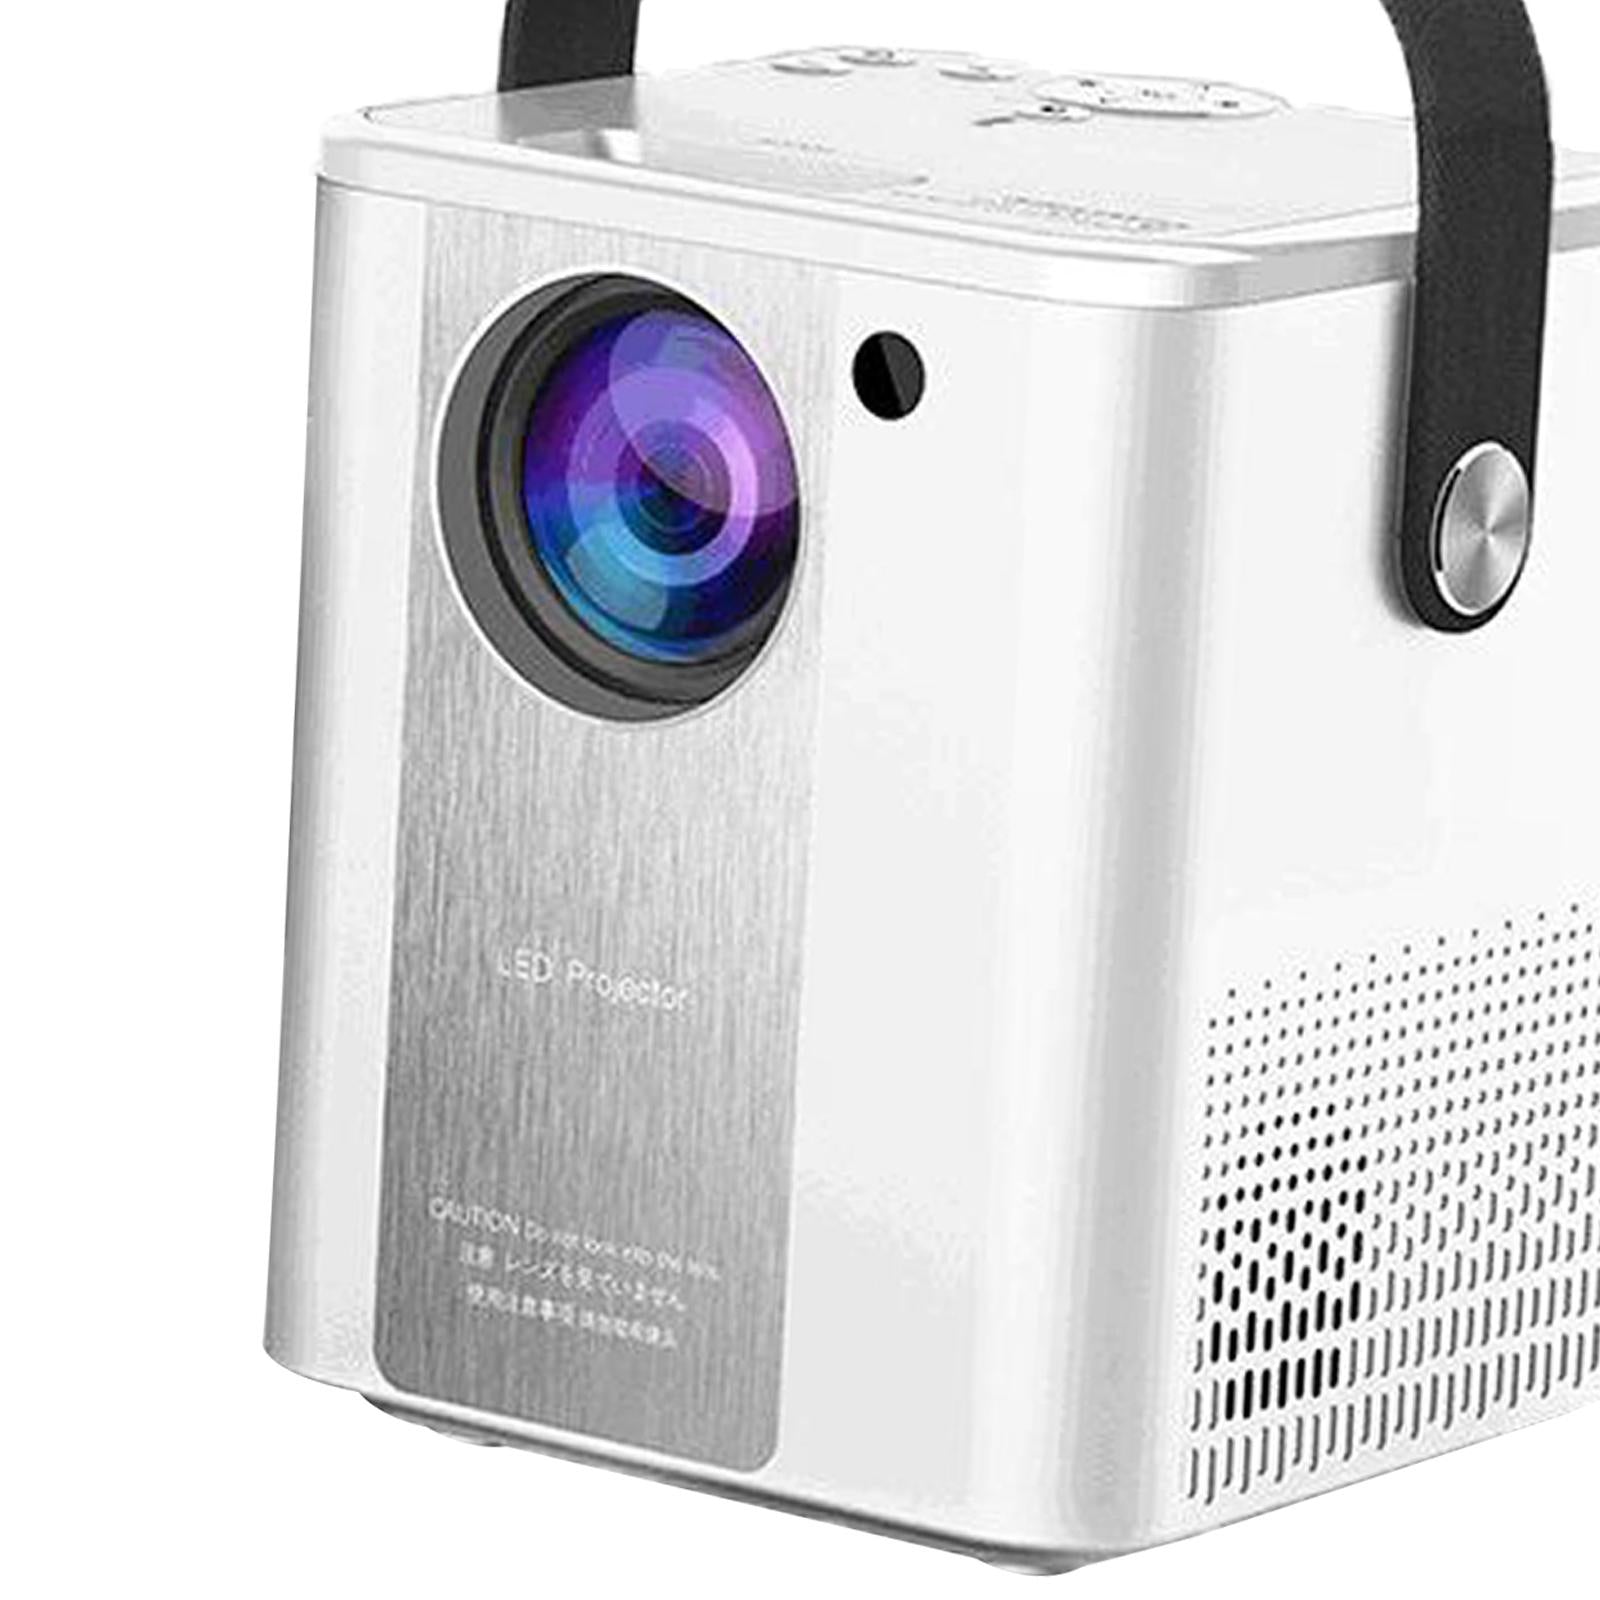 C500 Portable Projector Mobile Phone Home Theater Pocket Sized for Office Type C